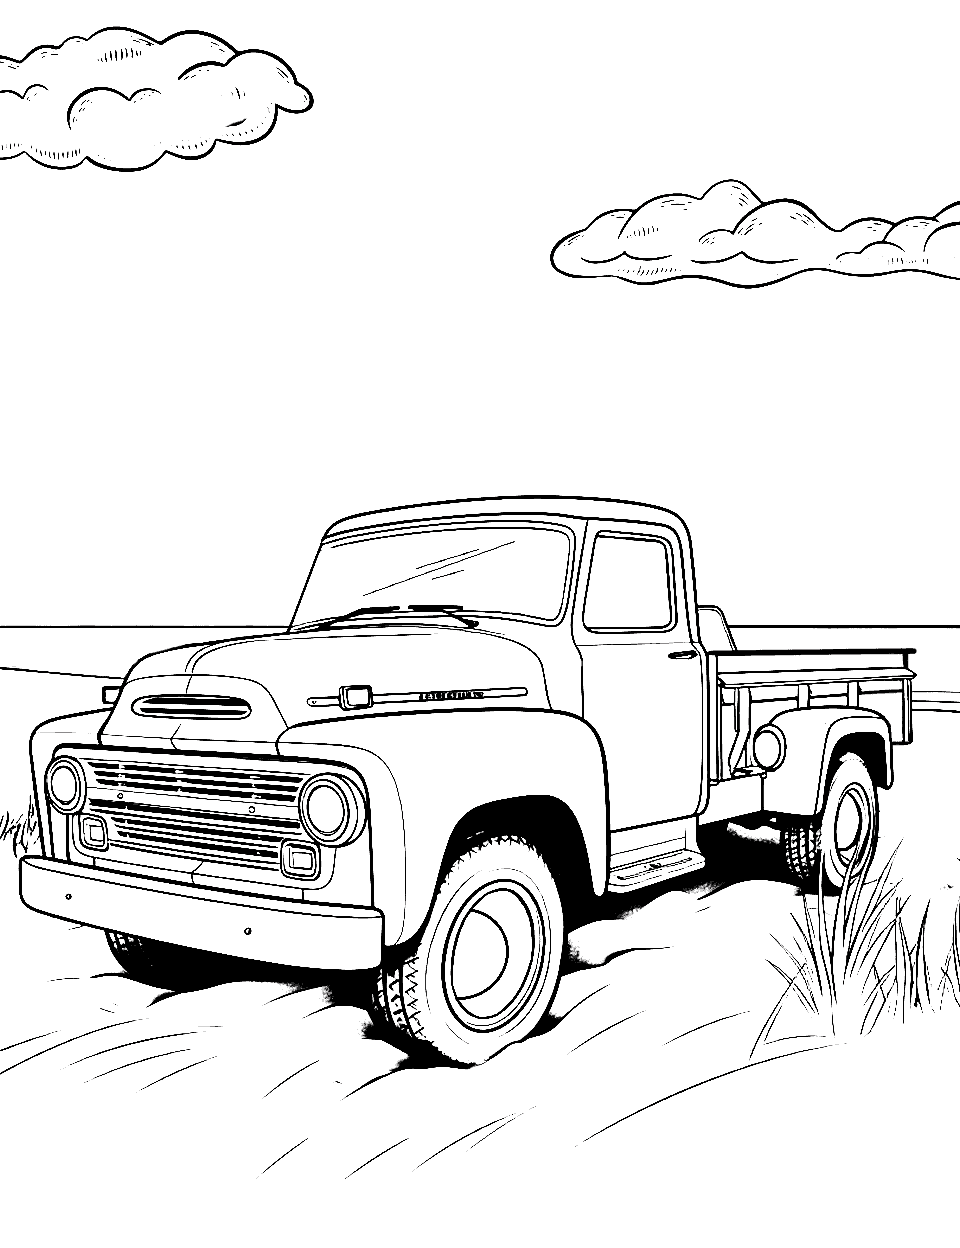 Easy Day on the Beach Coloring Page - A simple scene of a truck parked by the seashore on the beach.